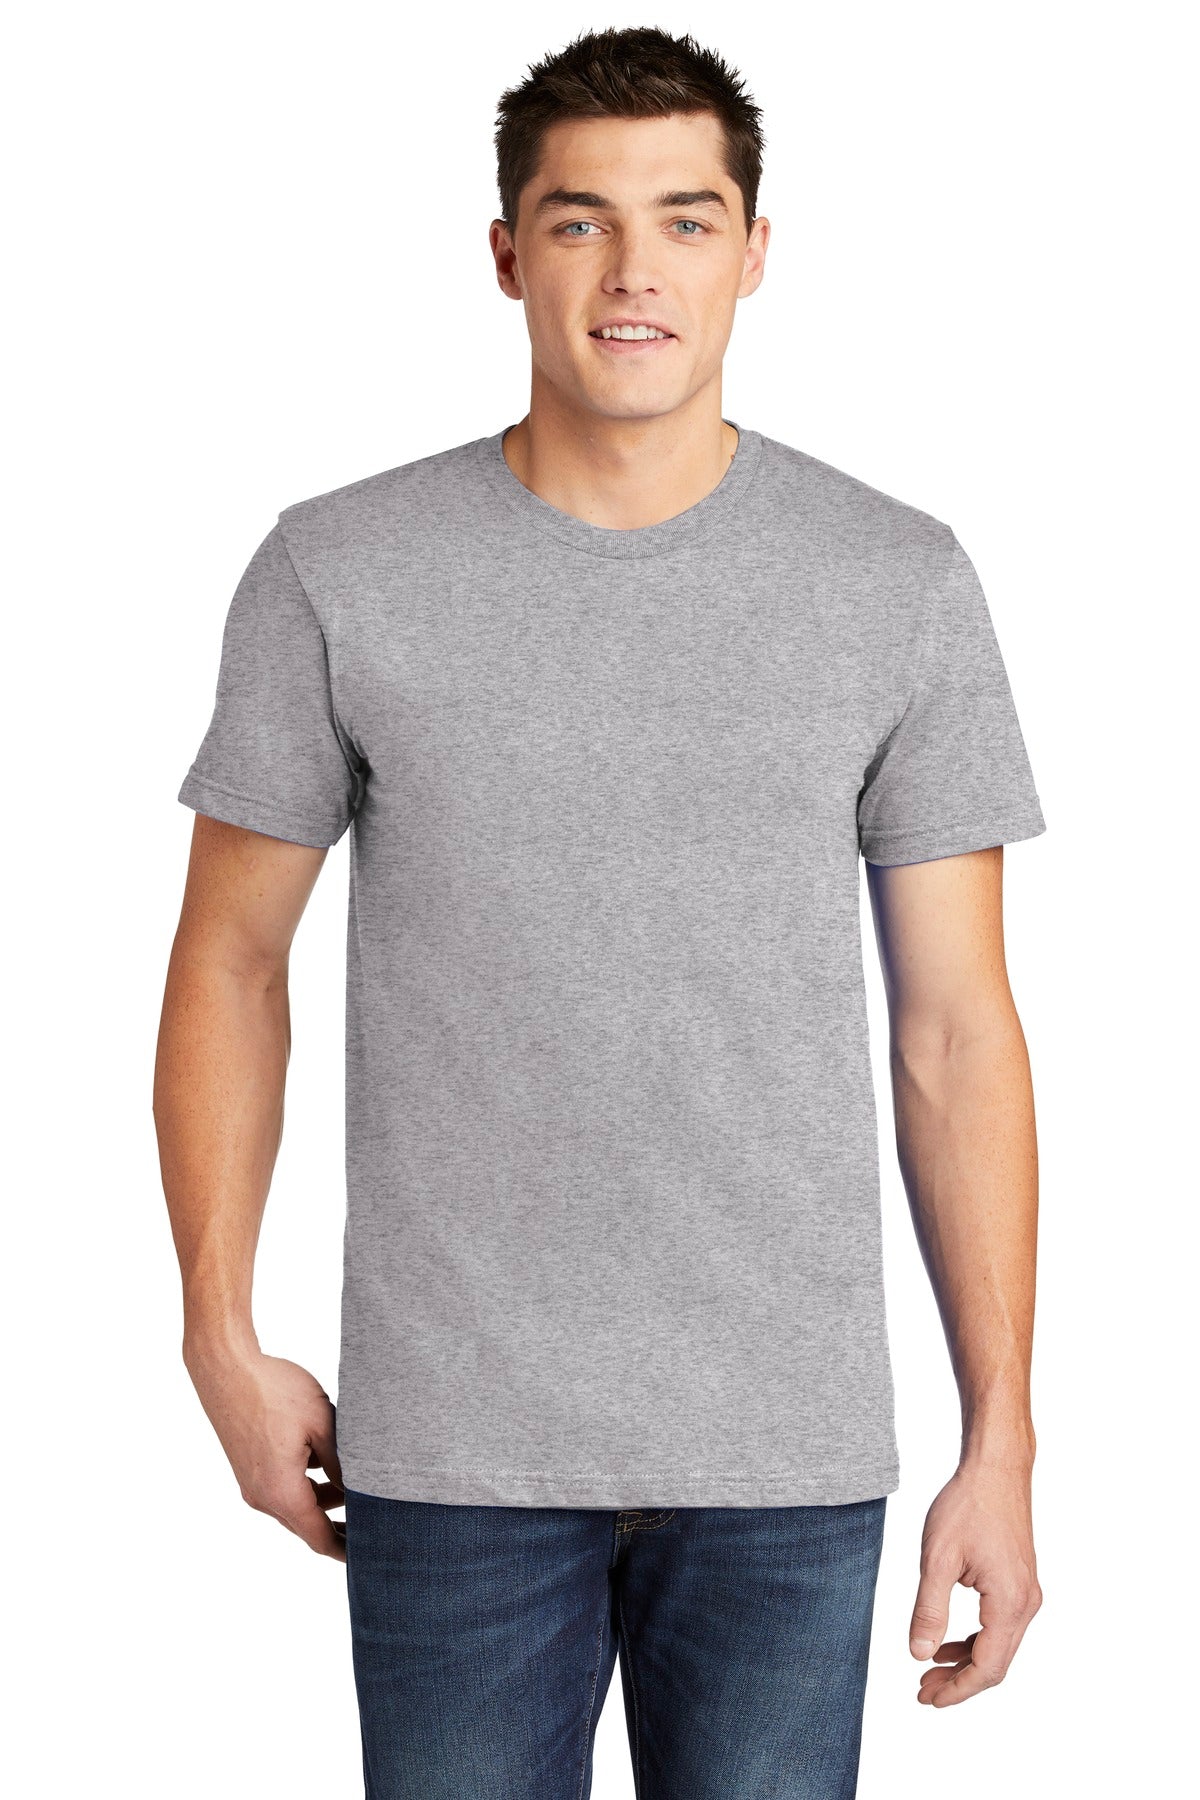 American Apparel ® USA Collection Fine Jersey T-Shirt. 2001A